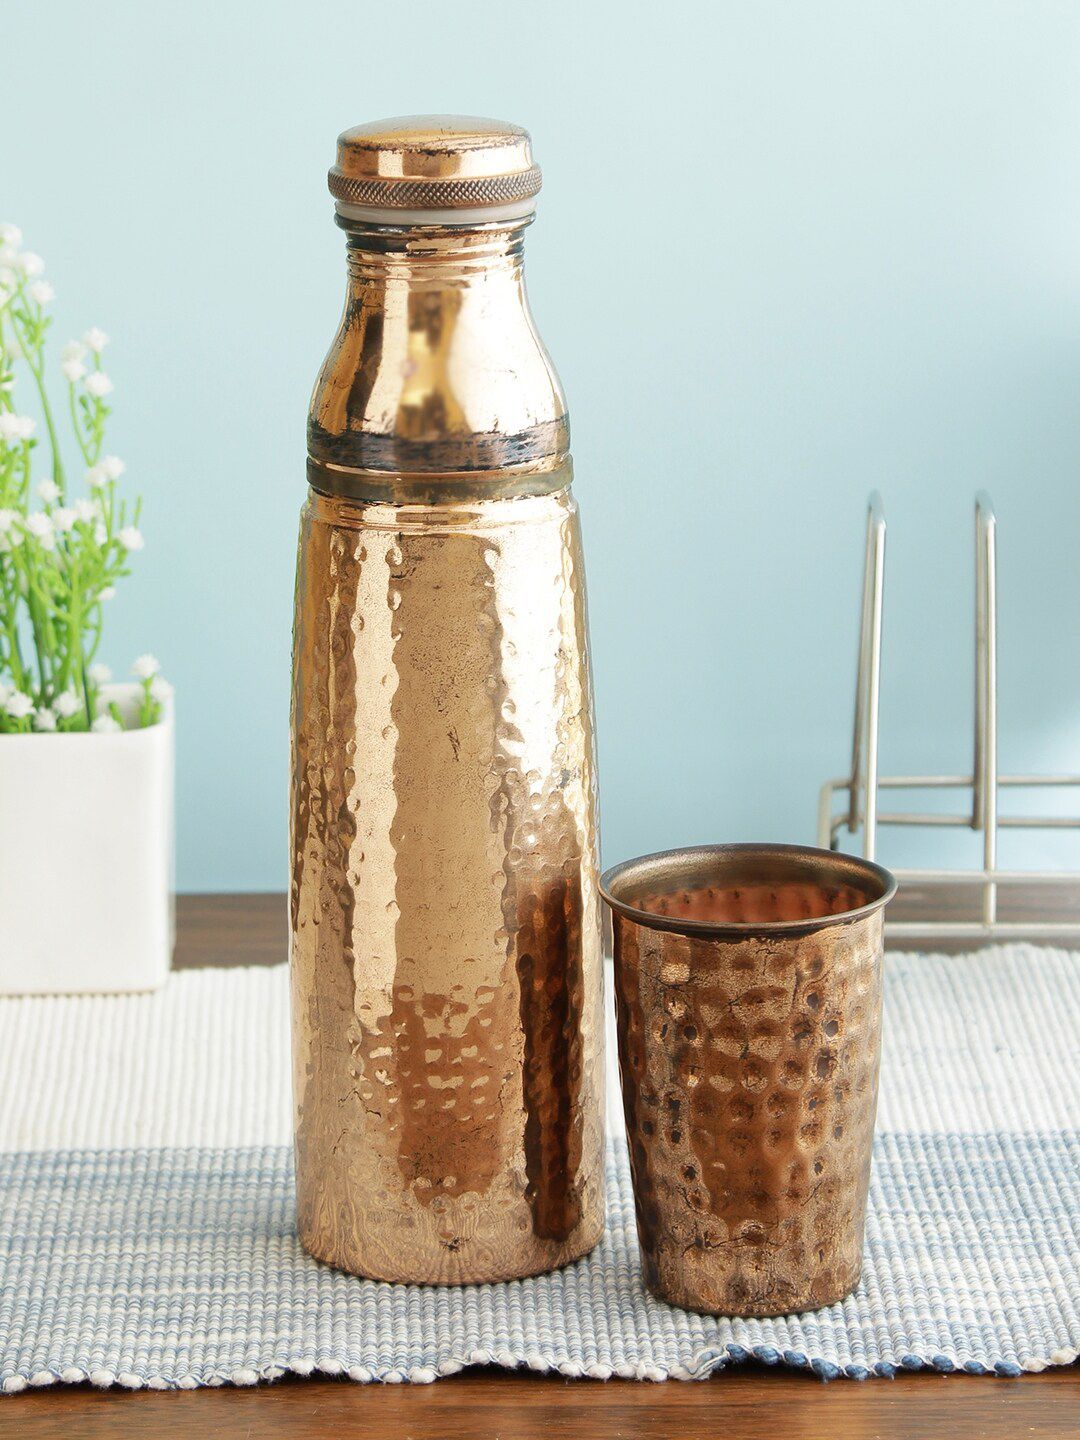 HomeTown Copper-Toned Hammered Copper Bottle With Glass Price in India